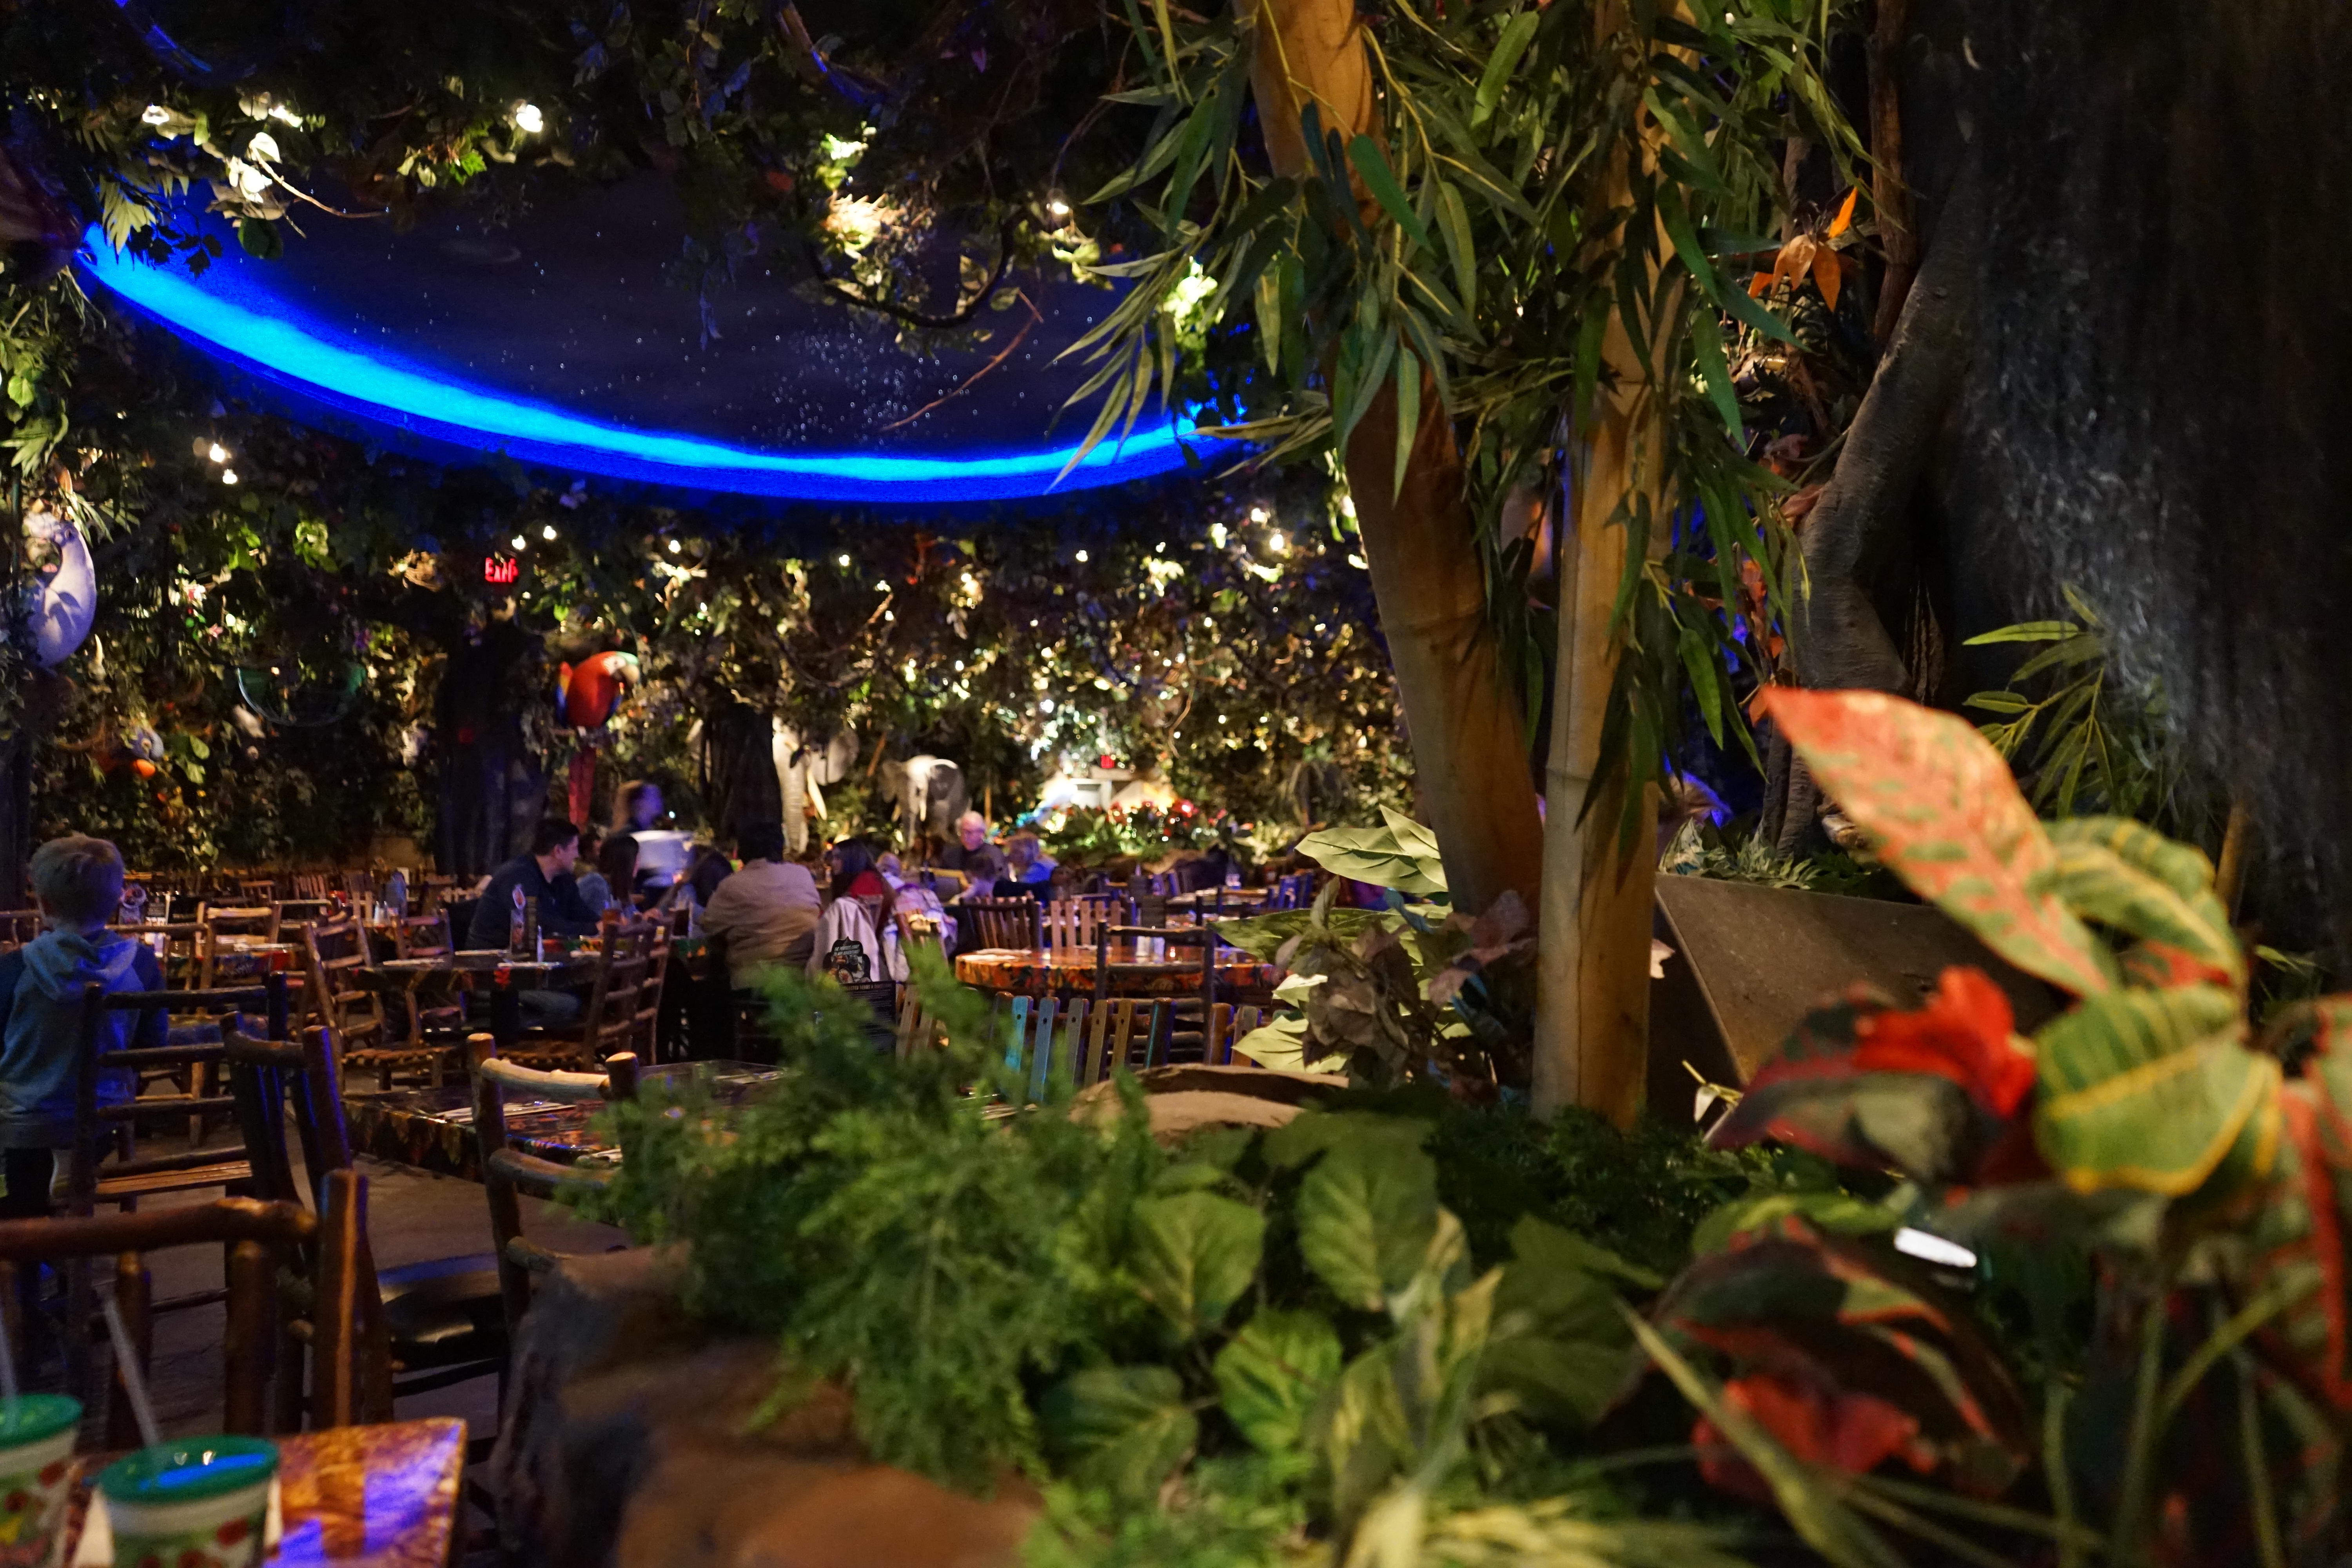 Rainforest Cafe at Woodfield Mall to close Jan. 1